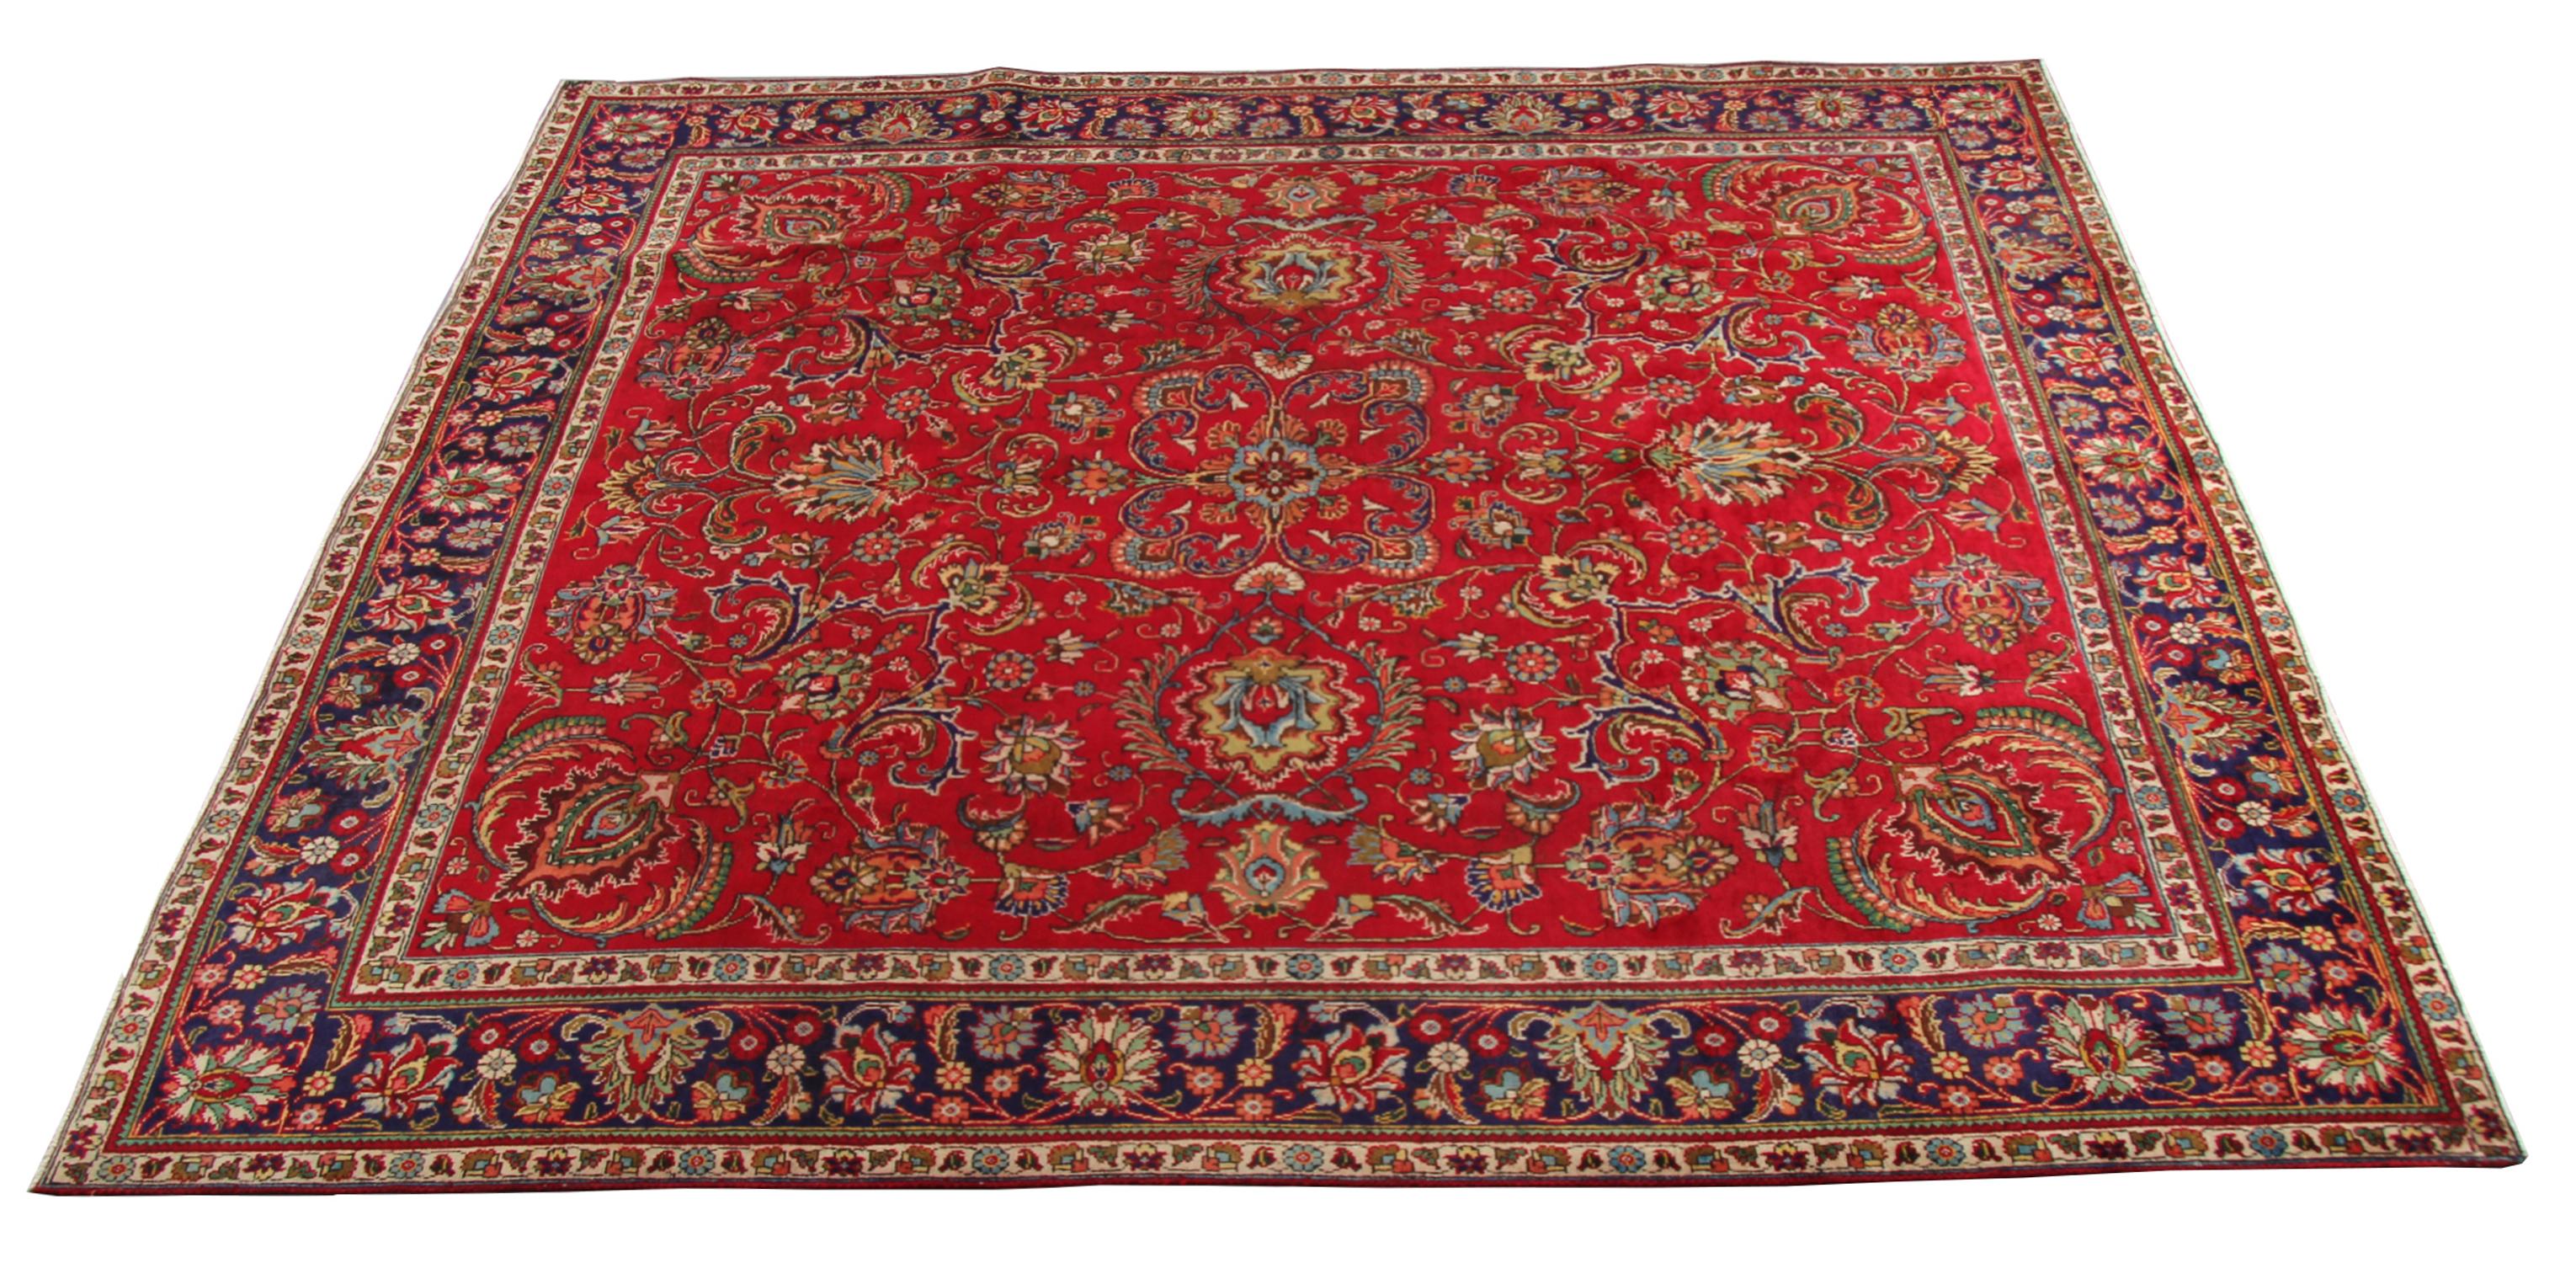 Decorated with a fantastic symmetrical medallion design, adorned with a high level of detail and a fantastic colour pallet including red, blue, rust and cream. This elegant design is sure to uplift any room it’s introduced to. These handmade